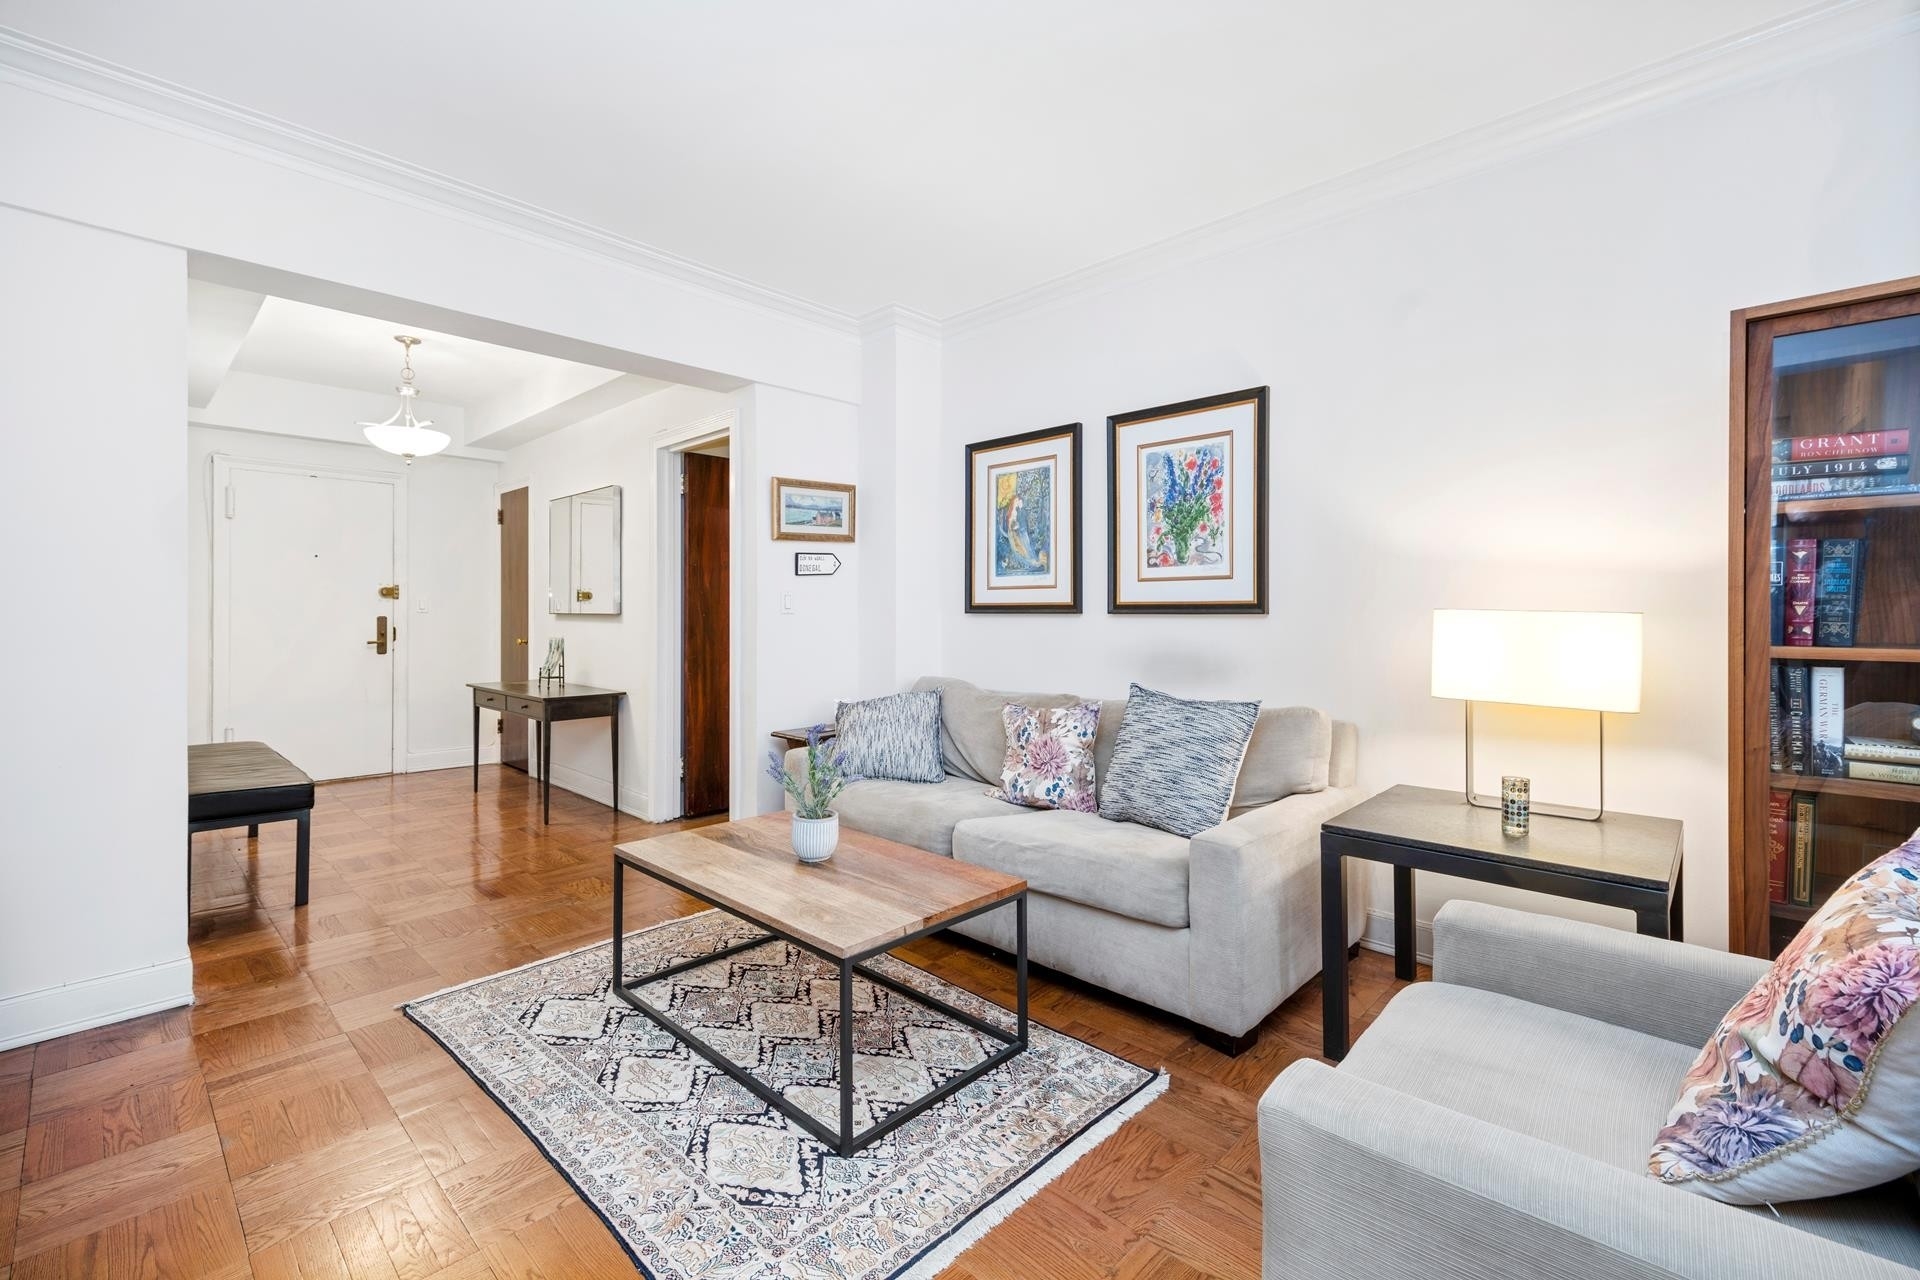 Co-op Properties for Sale at John Murray House, 220 MADISON AVE, 6C Murray Hill, New York, NY 10016